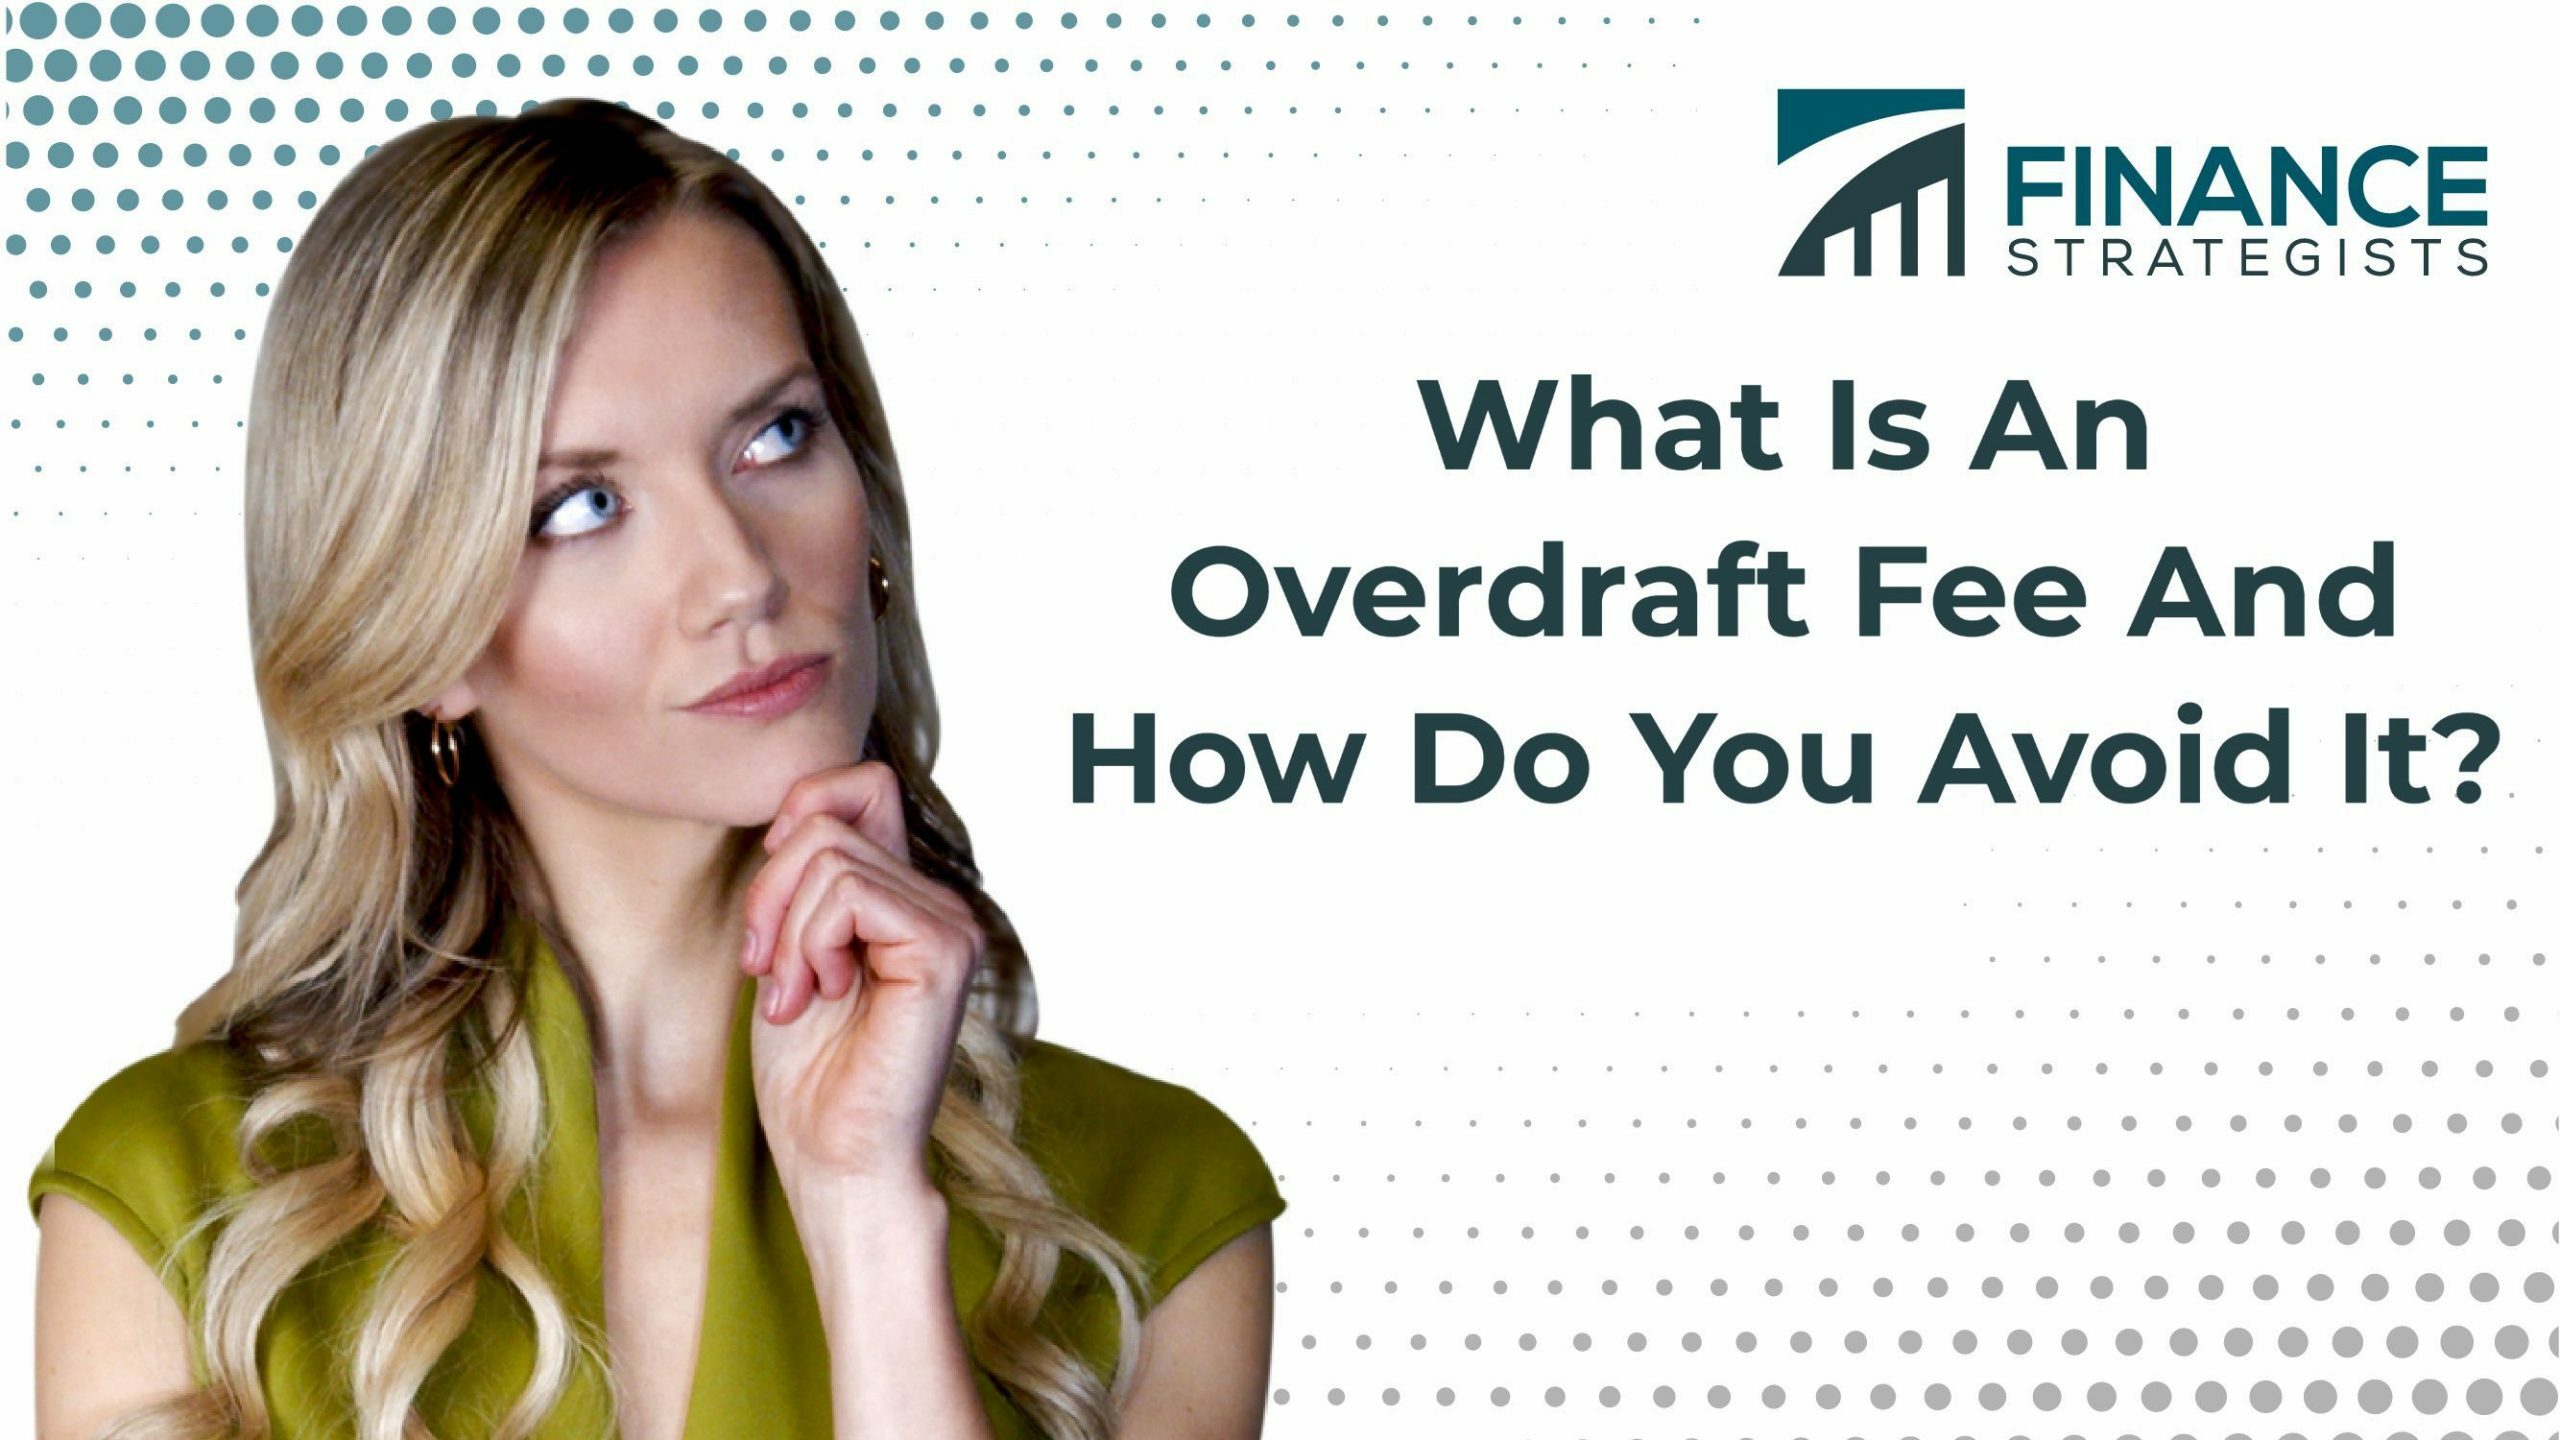 Overdraft Fee Definition, How To Avoid, Cost, Pros, and Cons